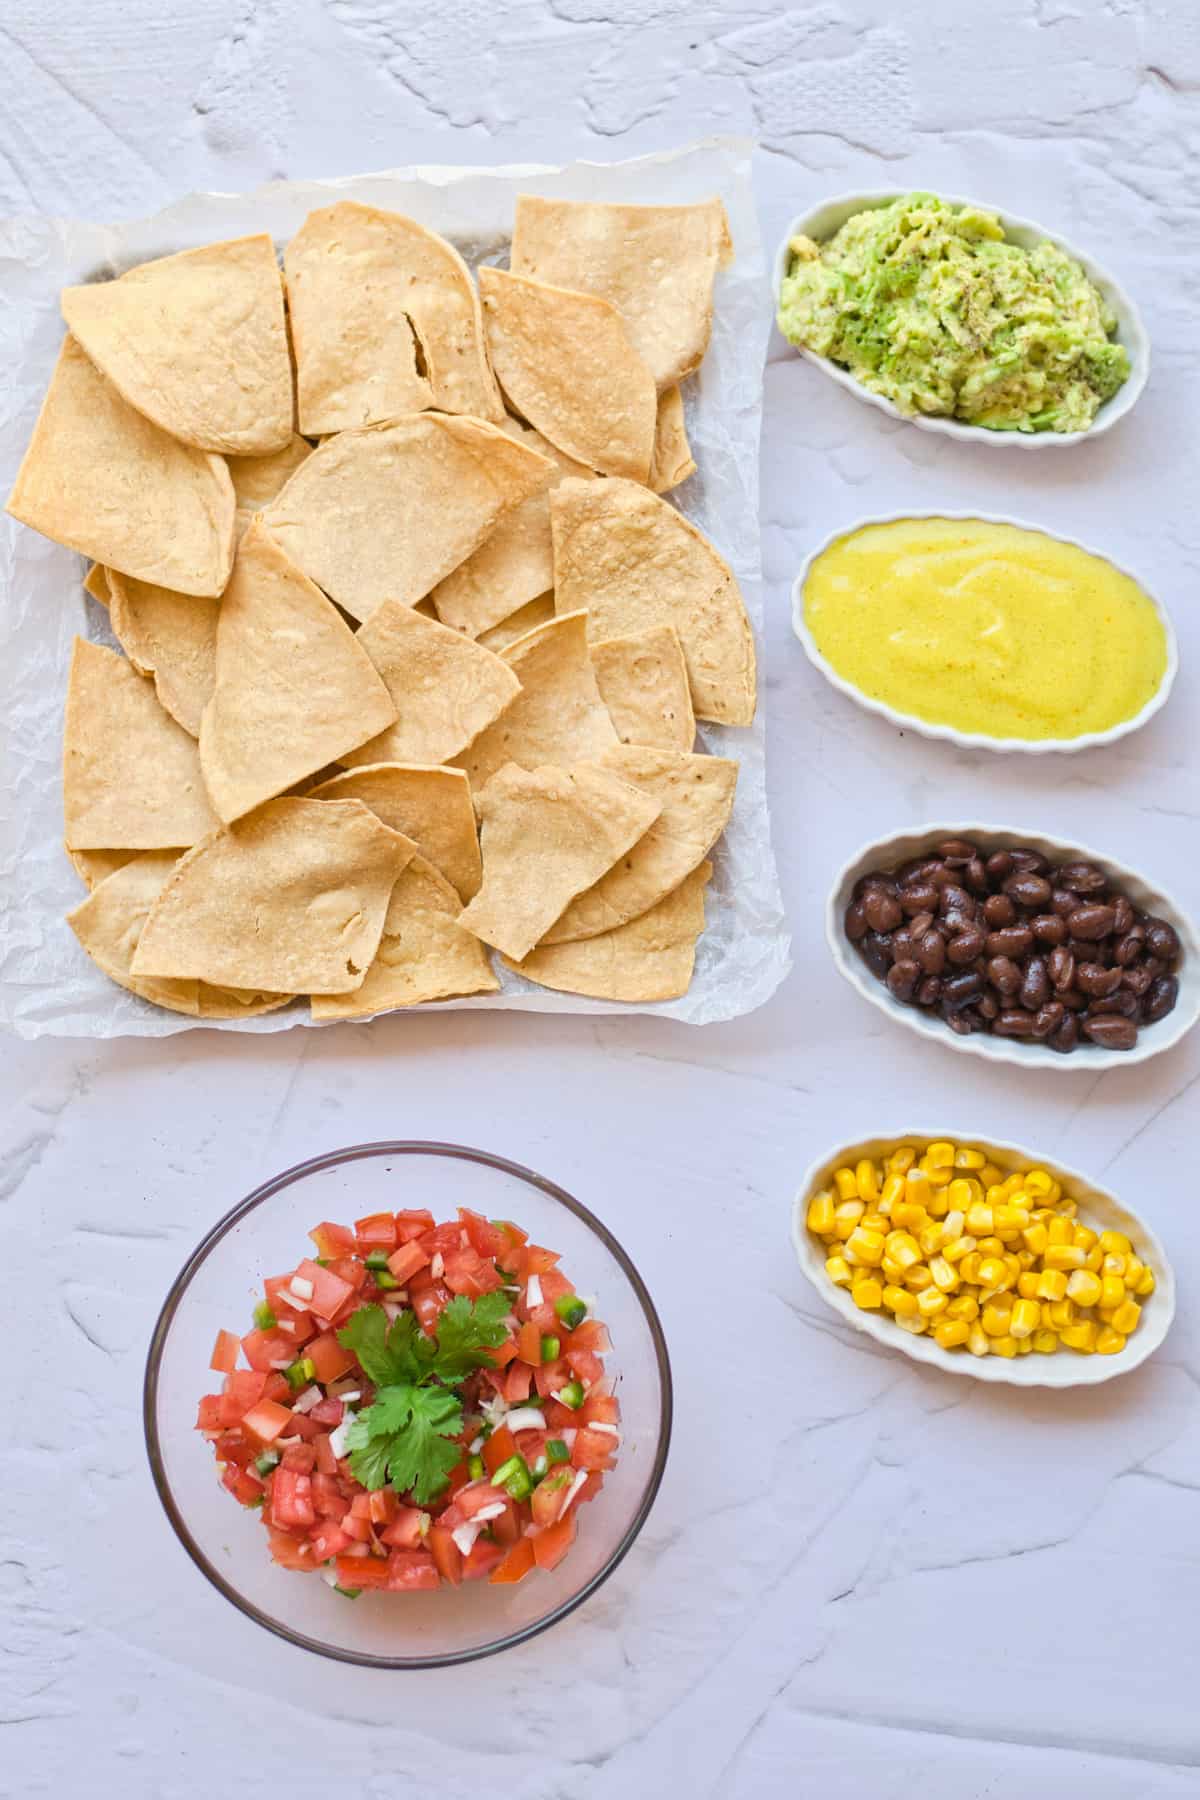 Tortilla chips with salsa, corn, black beans, and guacamole.